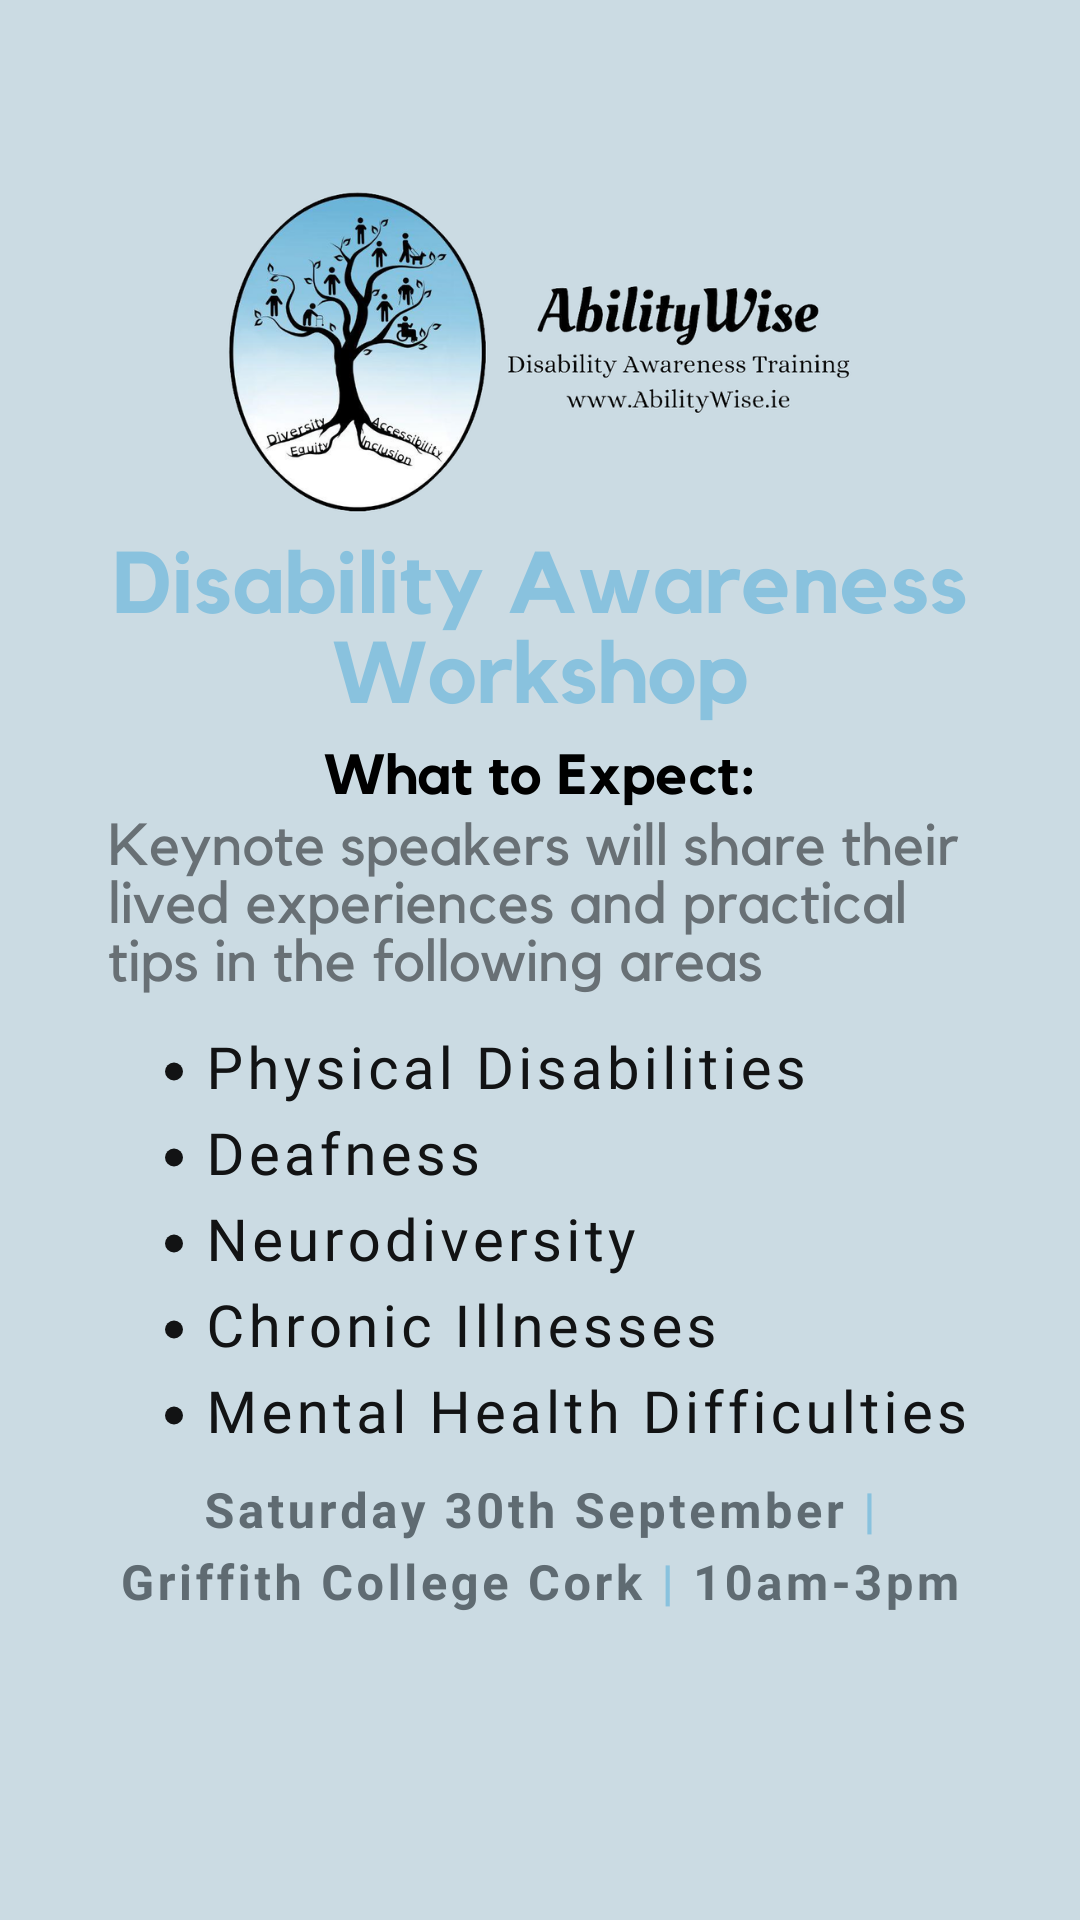 Light blue poster for Disability Awareness Workshop 30th Sep 10am-3pm @ Griffith College with Ability Wise Logo on the Top - Image of a tree with people of all ages and physical ability